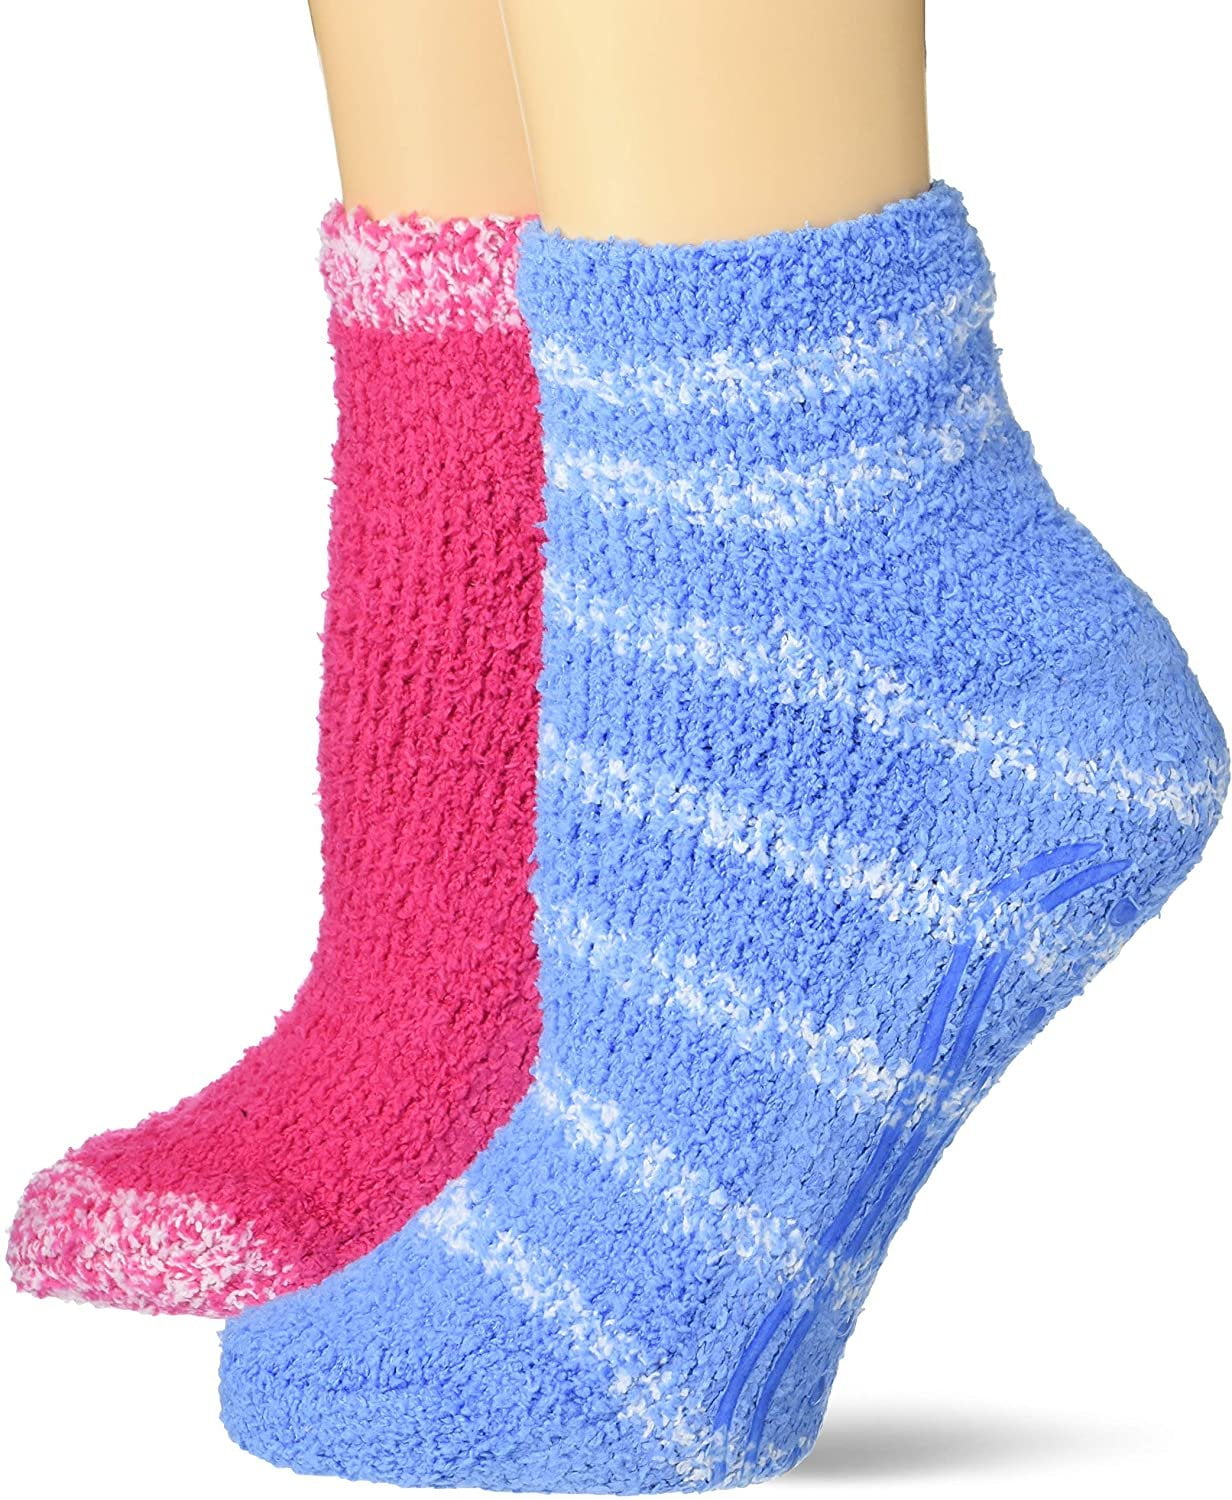 Dr Scholls Womens Soothing Spa Low Cut Lavender Vitamin E Socks 2 Pack 